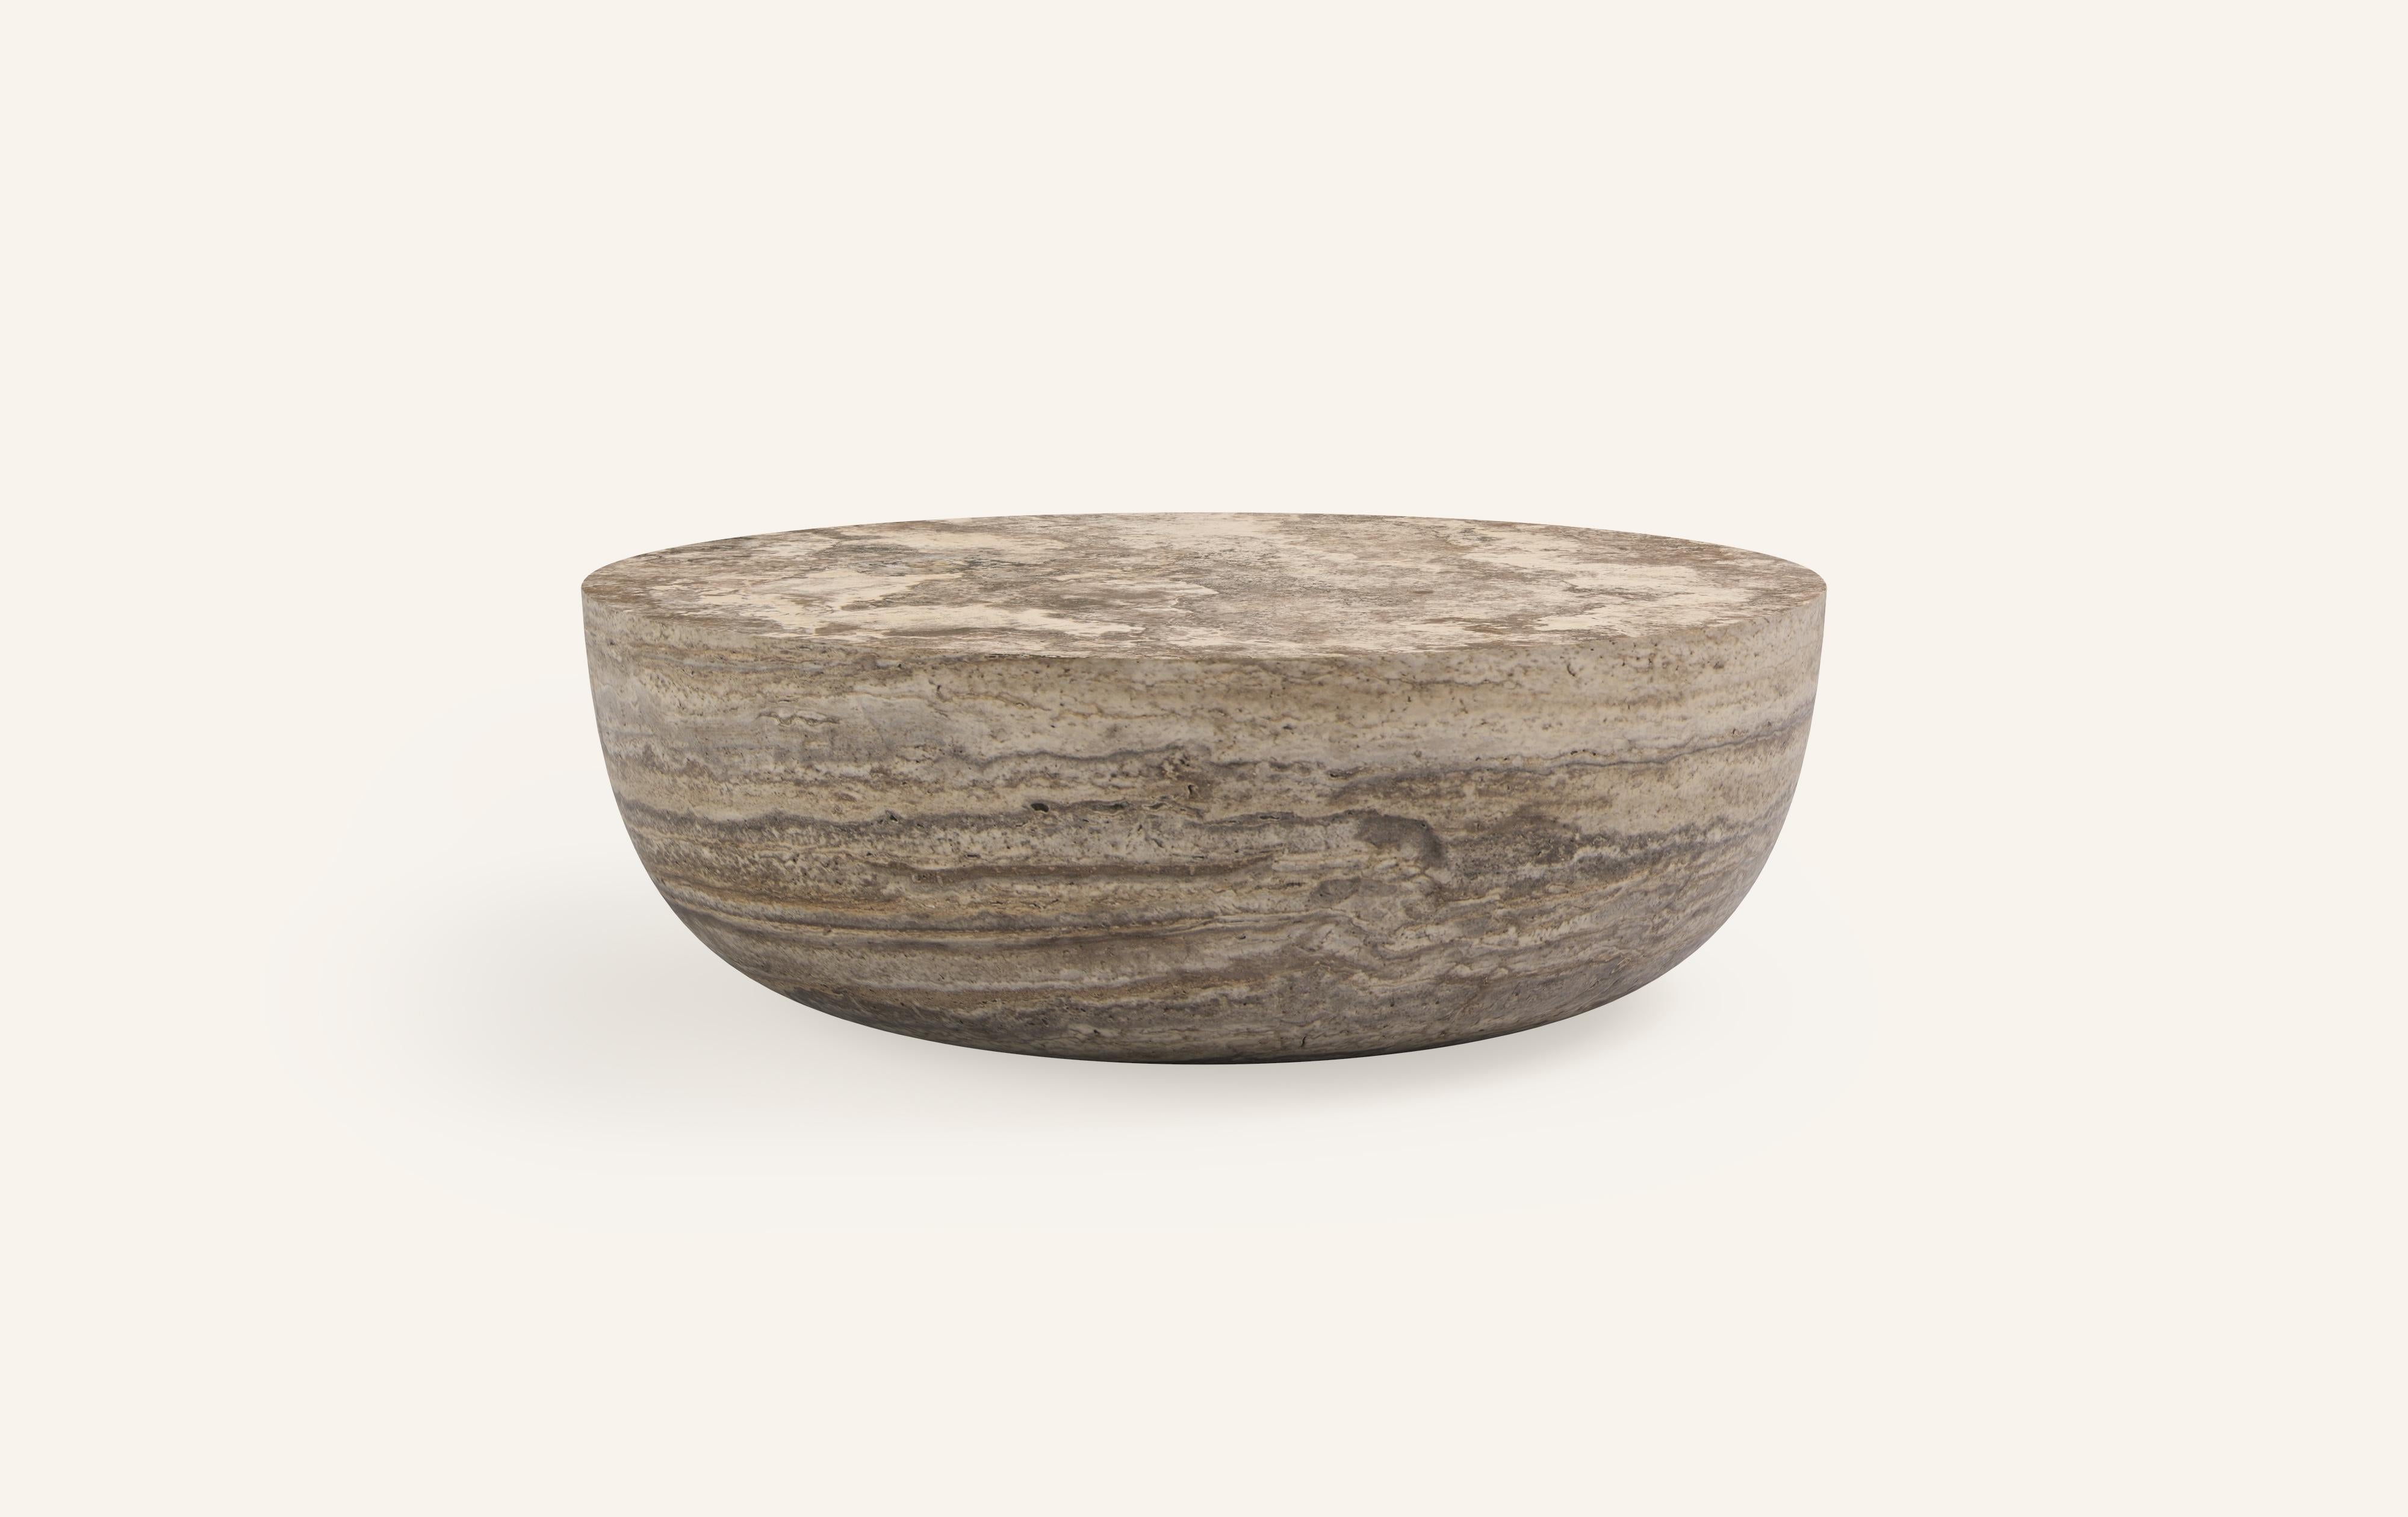 A SLICE OF A ’SPHERE’ OR 'SFERA' IN ITALIAN BALANCES A FLAT SURFACE ATOP AND ROBUST MONOLITH FORM. WITH A BASE SOFTENED BY A CURVED PROFILE, SFERA IS SOFT AND EARTHY IN ITS AVAILABLE STONE SELECTIONS.

DIMENSIONS: 
42”L x 42”W x 16”H: 
- SOLID